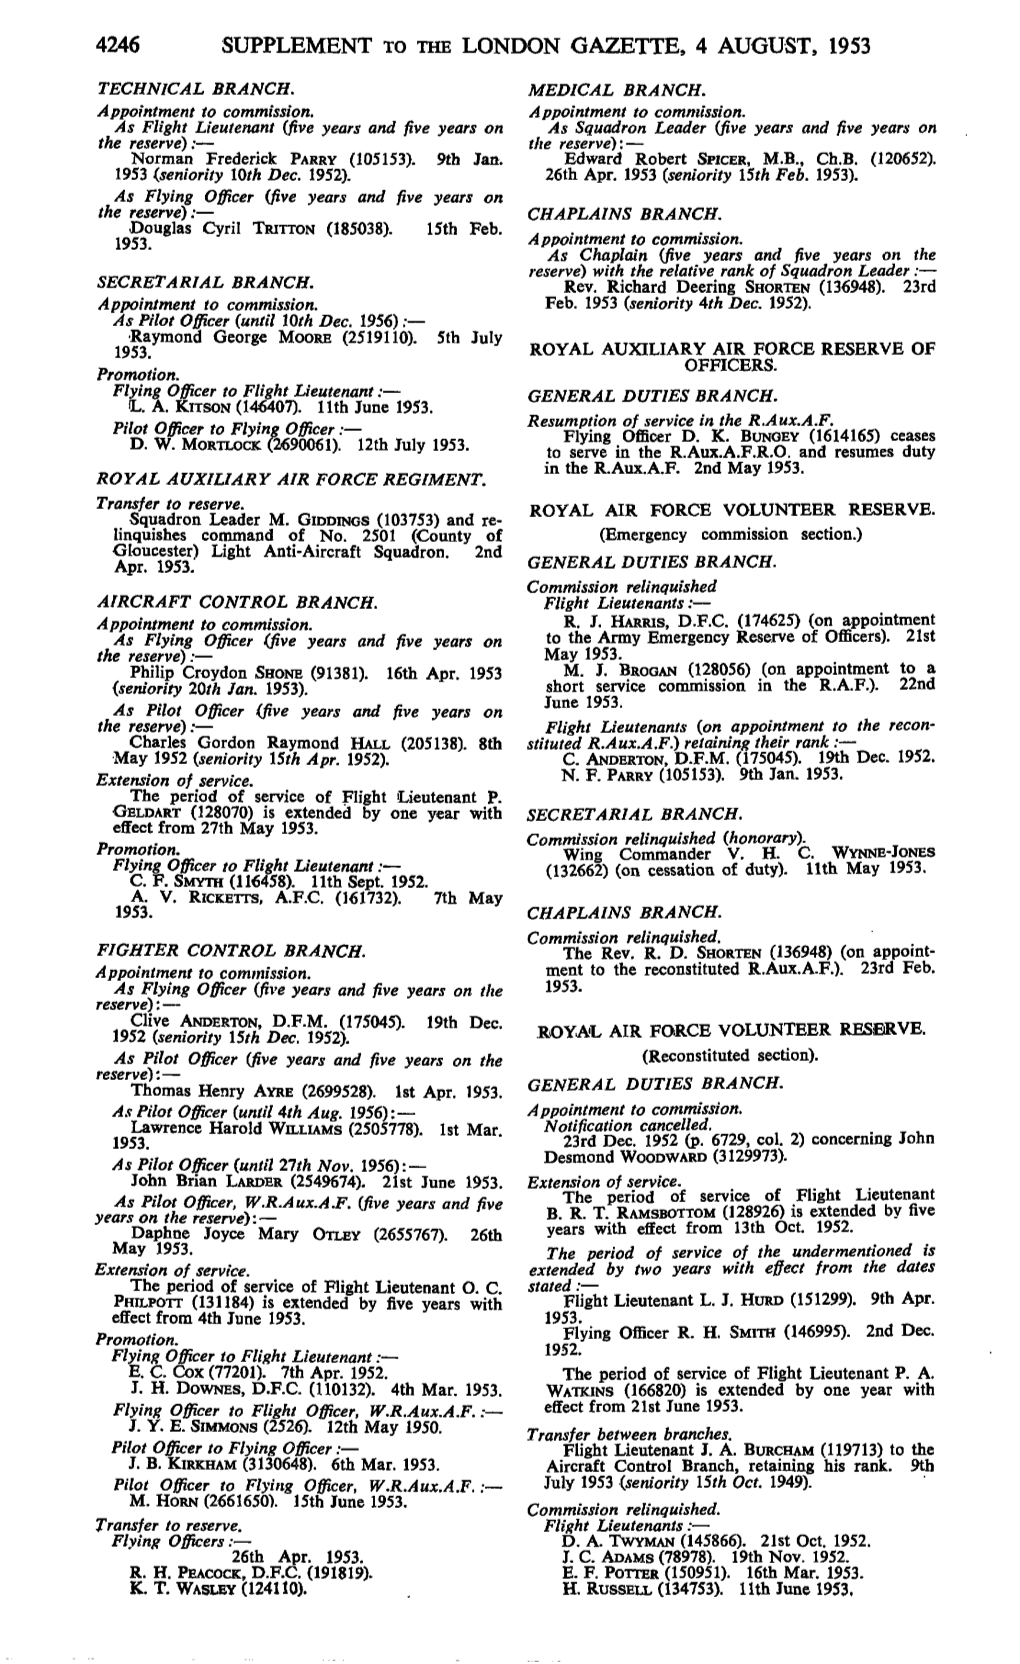 4246 Supplement to the London Gazette, 4 August, 1953